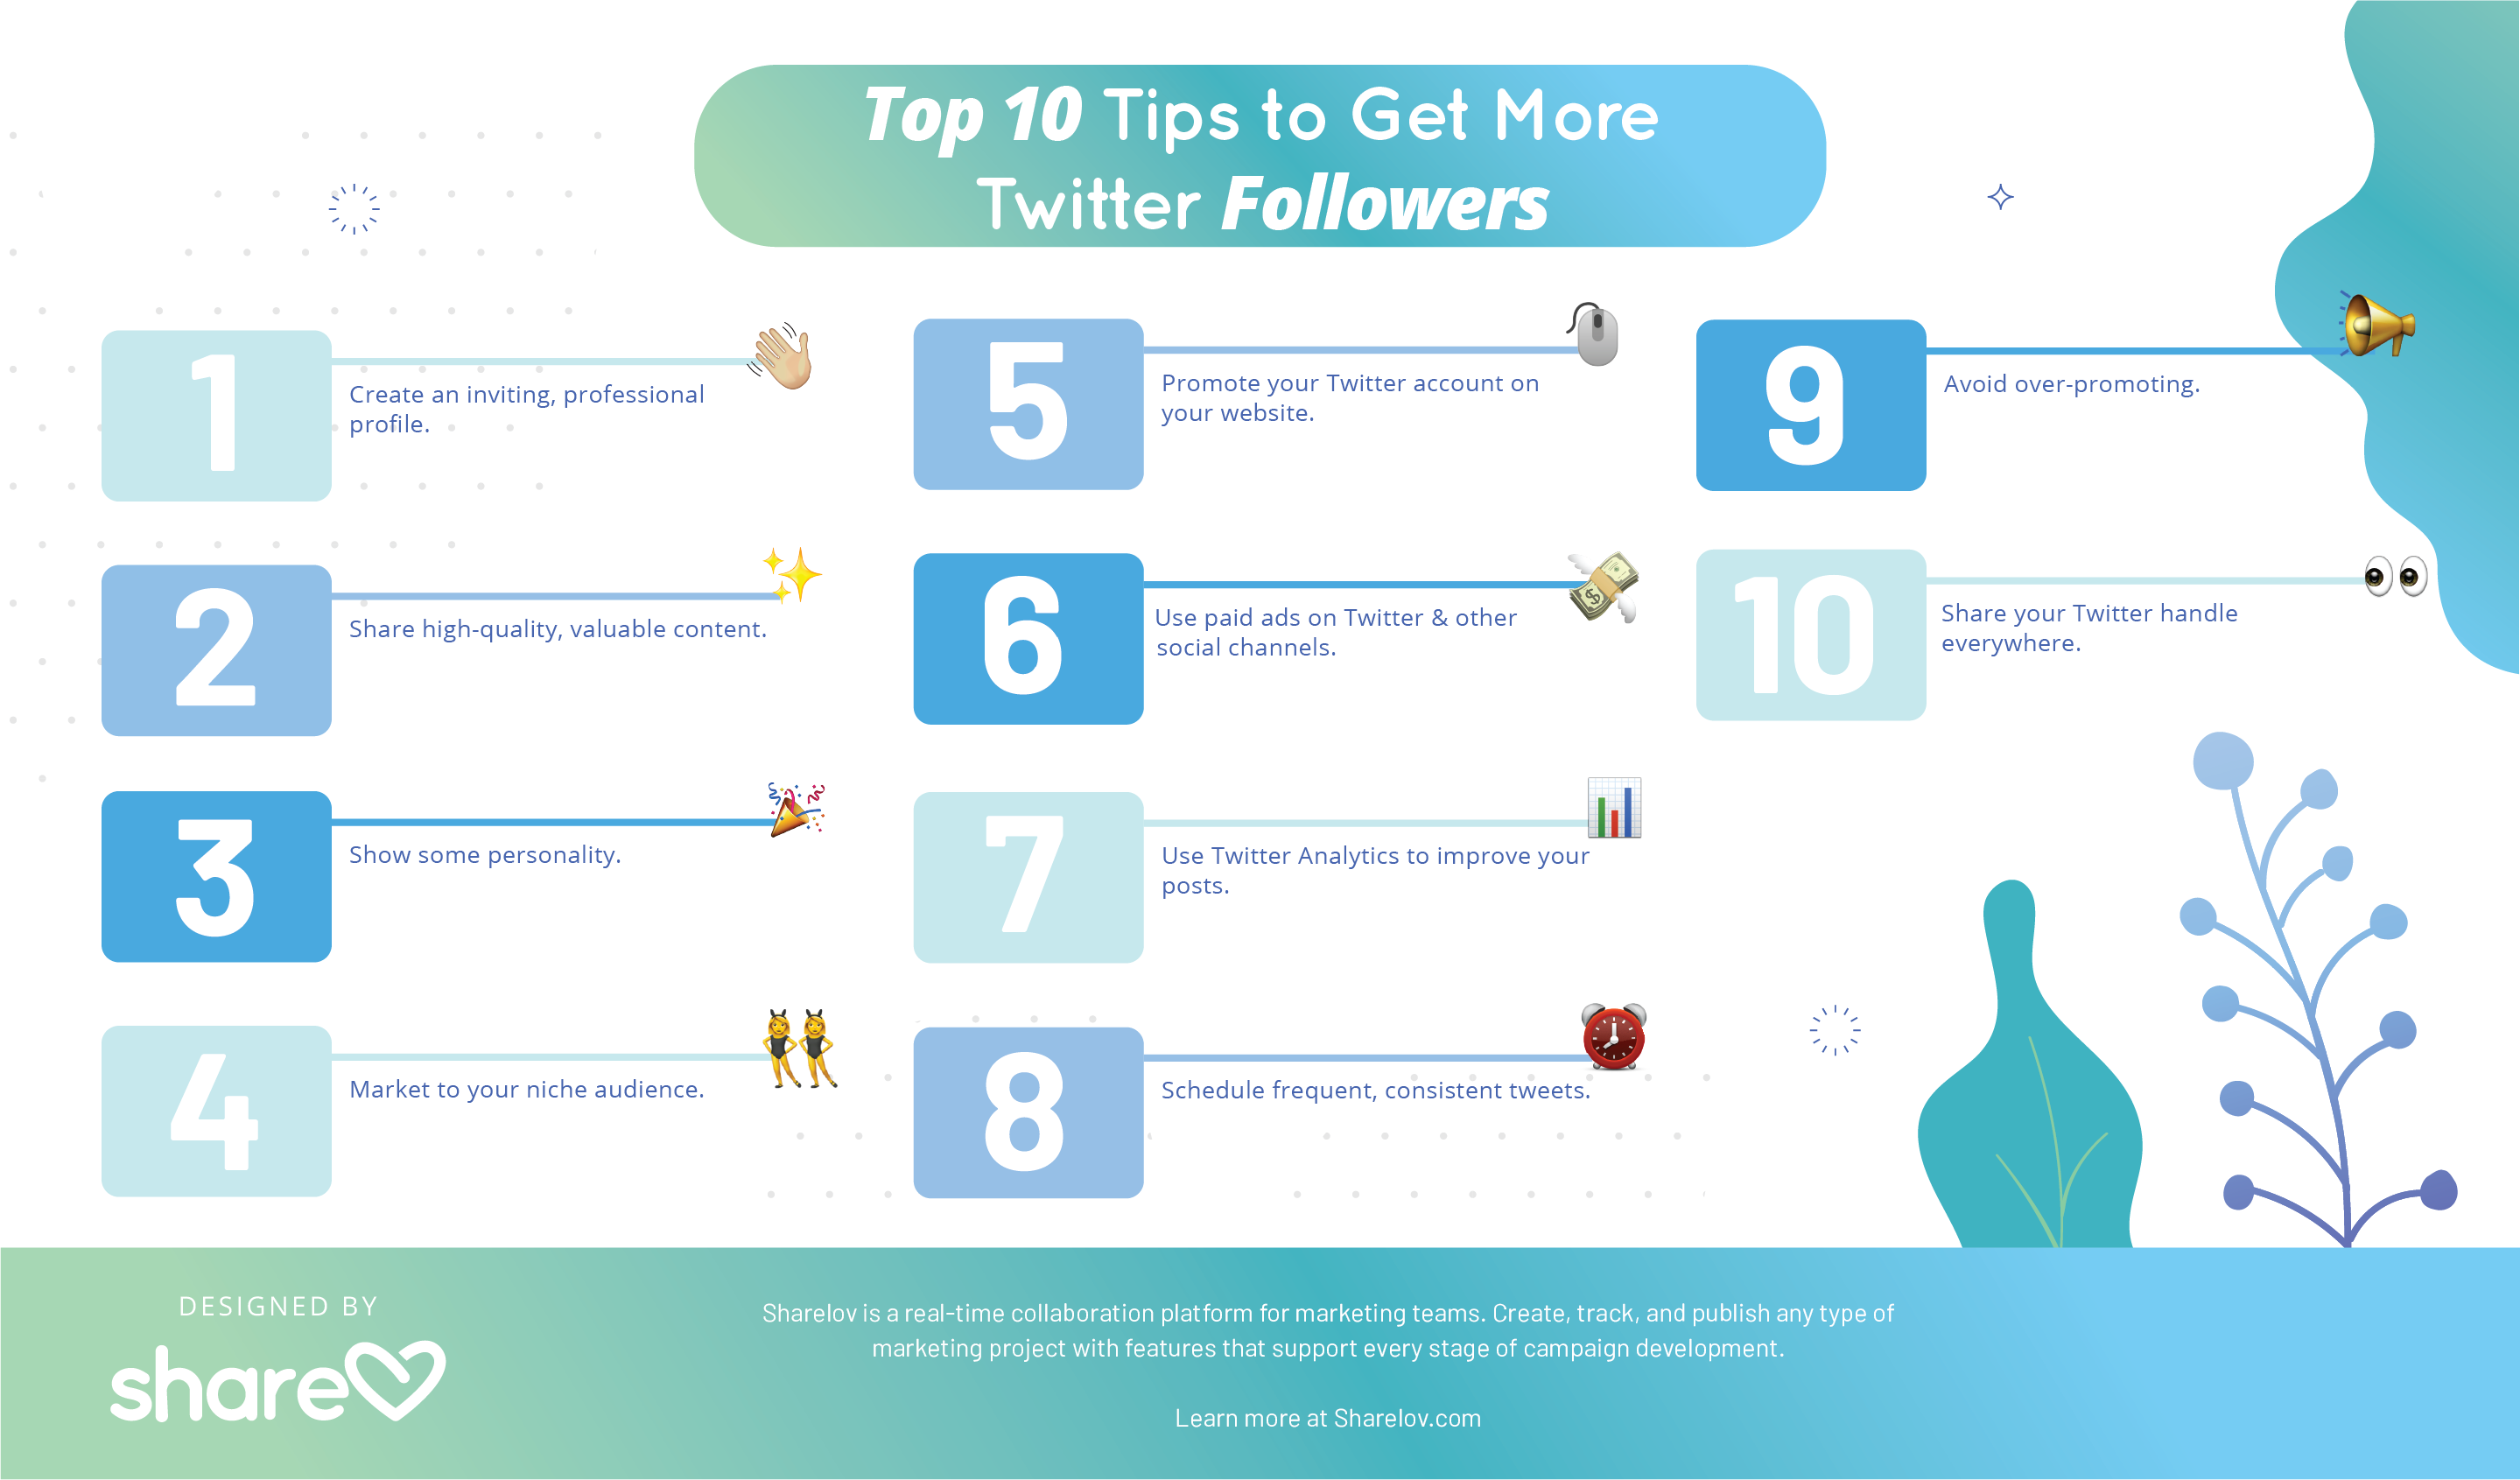 Top 10 Tips for getting more Twitter Followers infographic